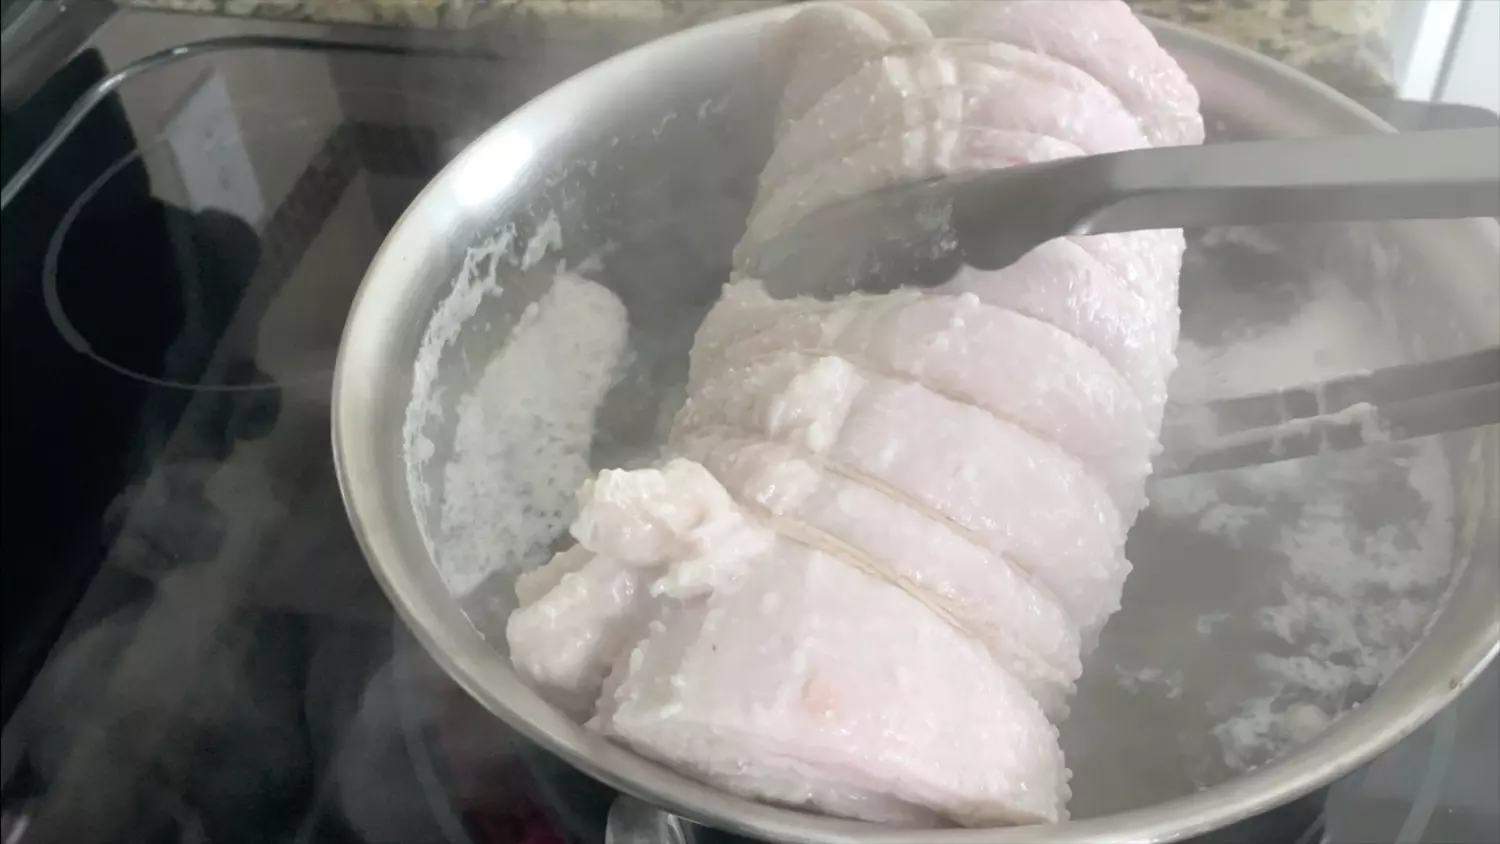 After the water comes to a boil, remove pork belly from boiling water to remove impurities.